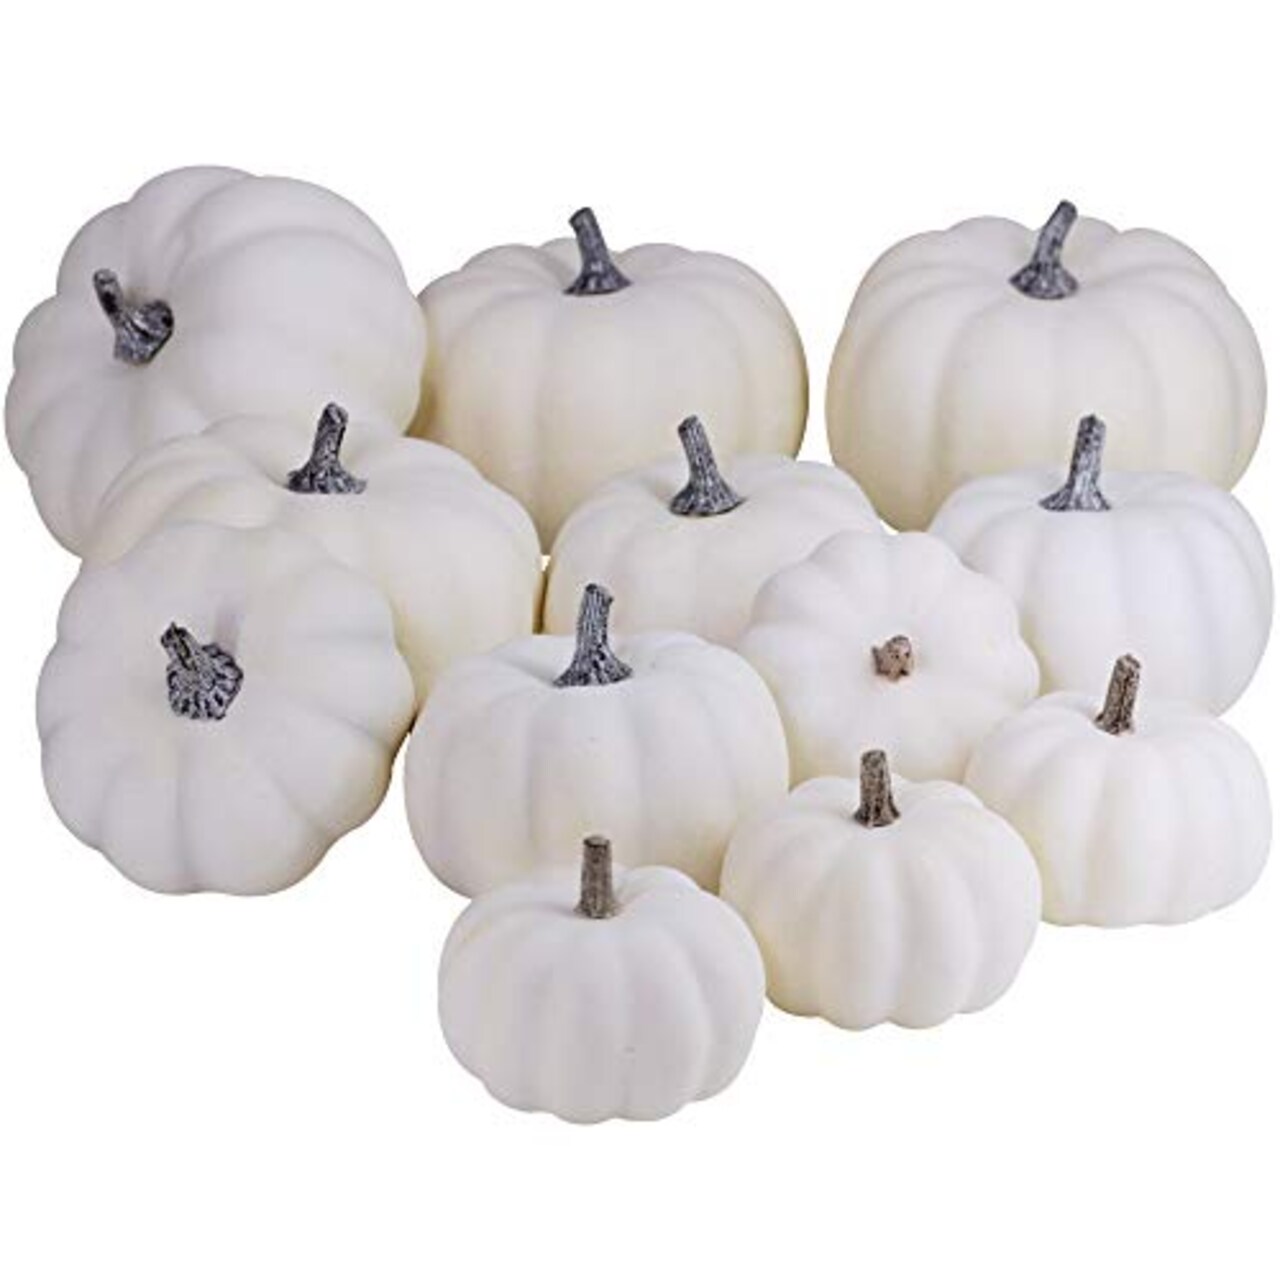 BESTTOYHOME 12 PCS Assorted Sizes Rustic Harvest White Artificial Pumpkins for Halloween, Fall Thanksgiving Decorating Harvest Embellishing and Displaying